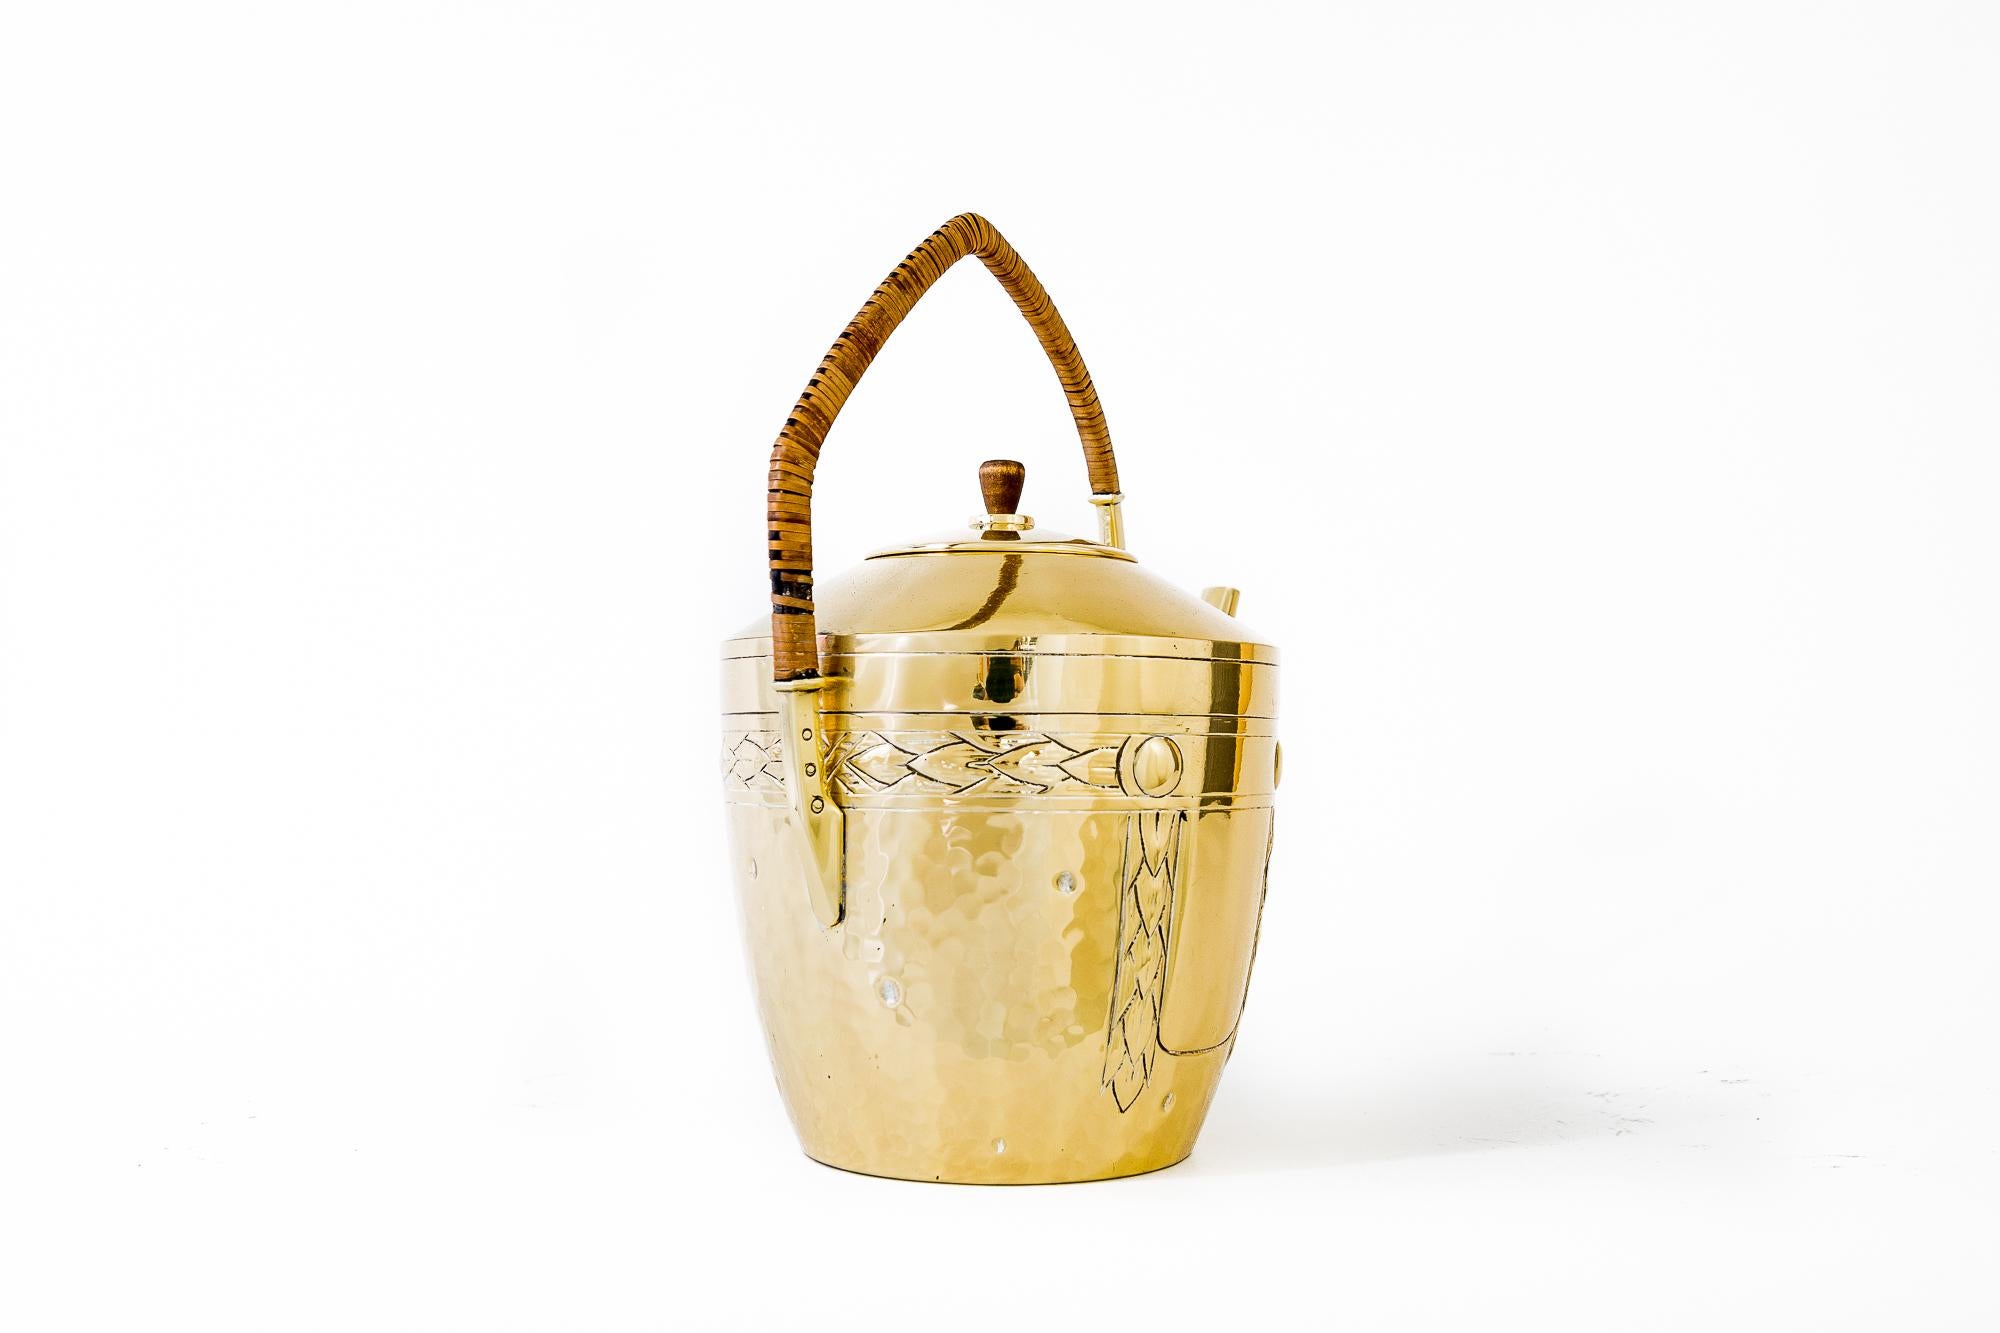 Art Deco brass can with wicker handle around 1920s
Polished and stove enameled.